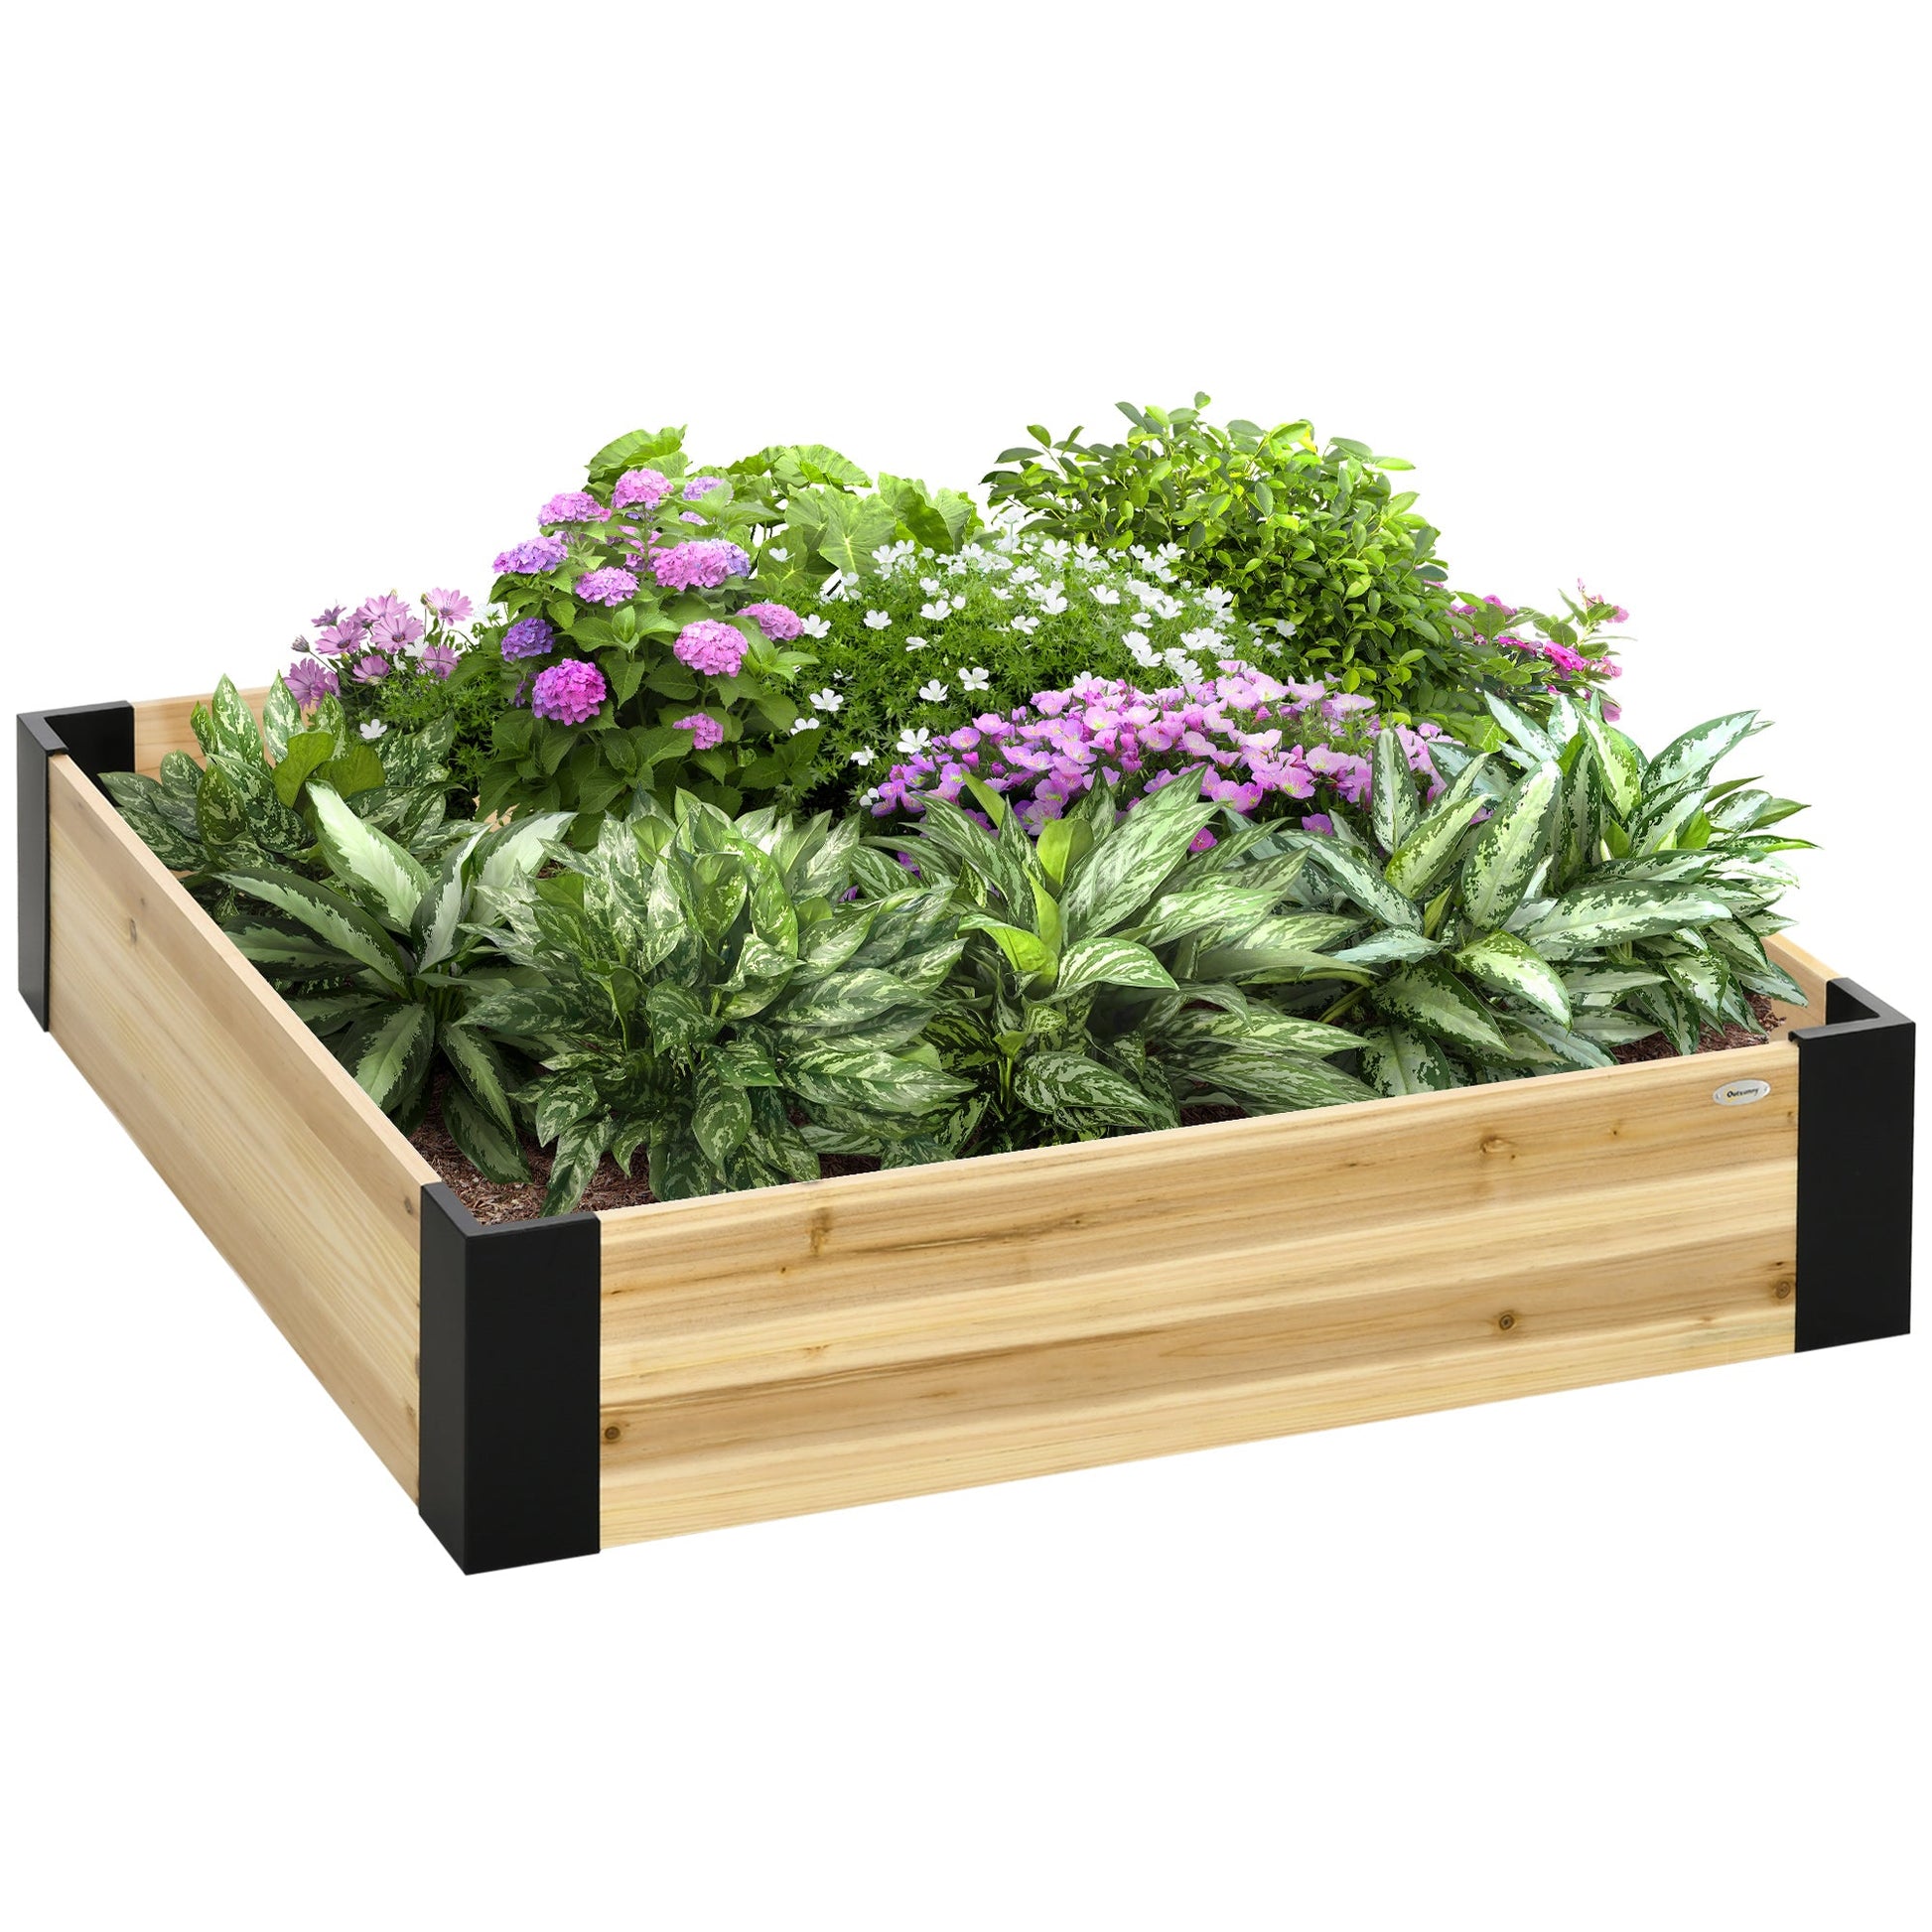 47" x 47" Raised Garden Bed with Metal Corner Bracket, Easy to Install Planter Box for Growing Vegetables, Flowers, Fruits, Herbs, and Succulents at Gallery Canada